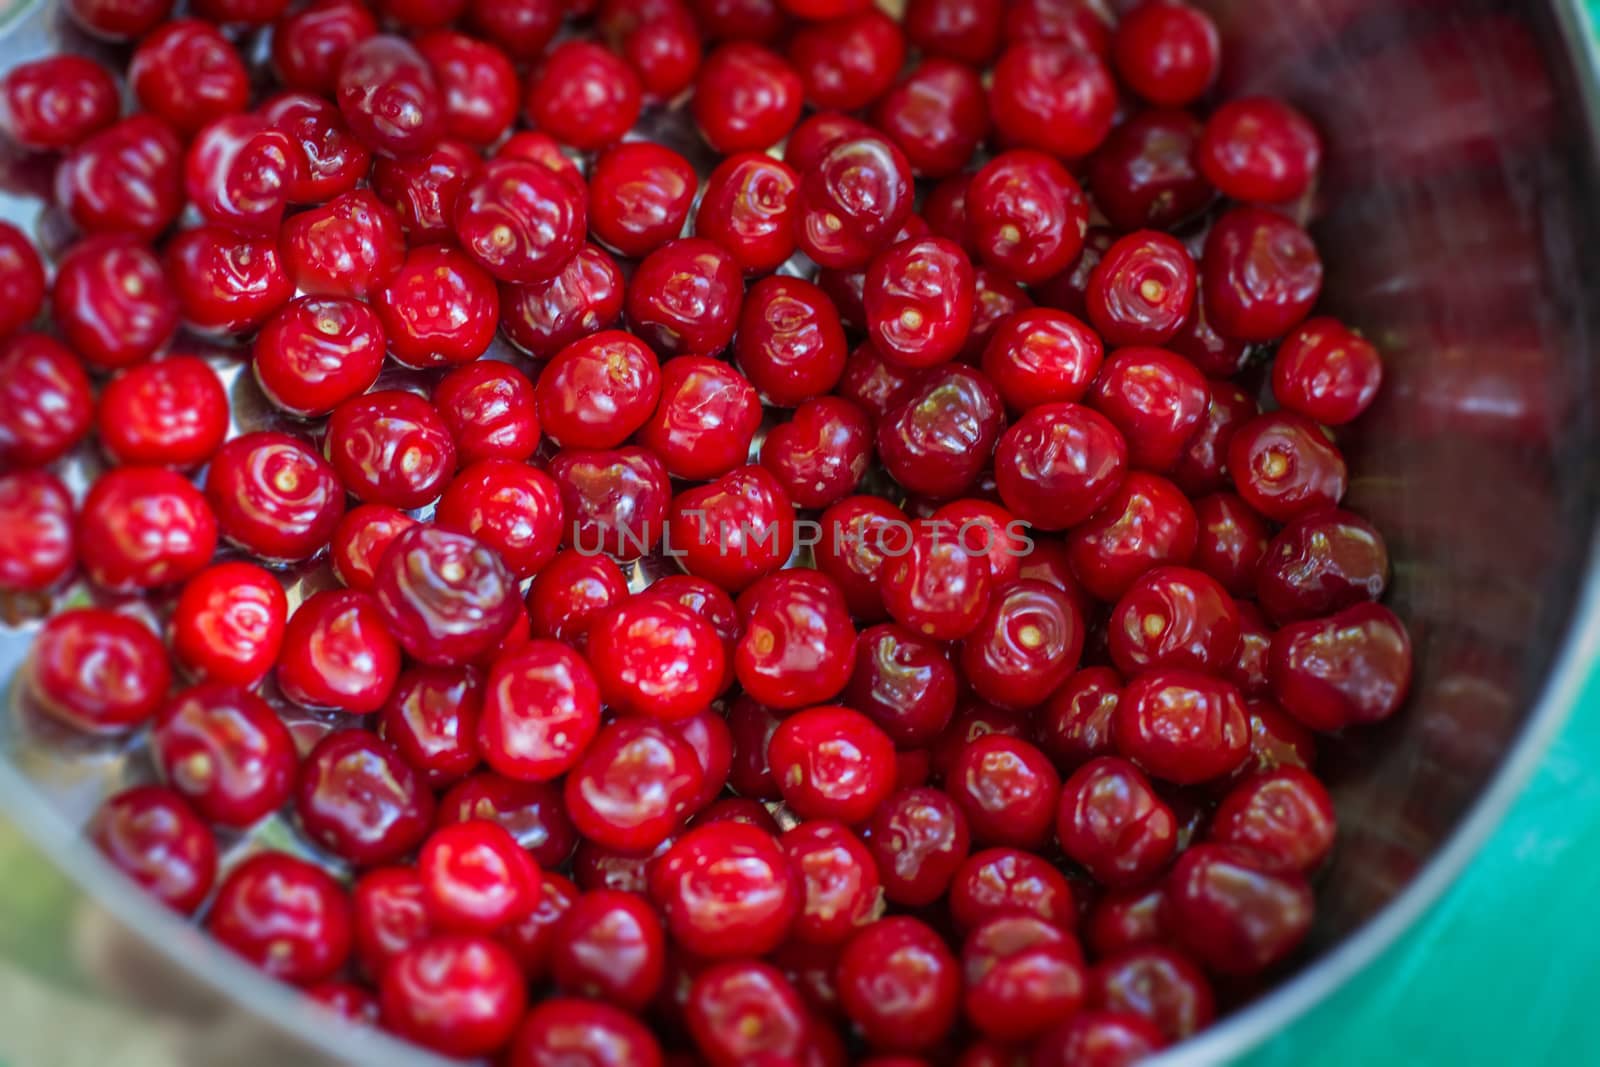 Sweet red Cherry in Bowl on Table top close-up view